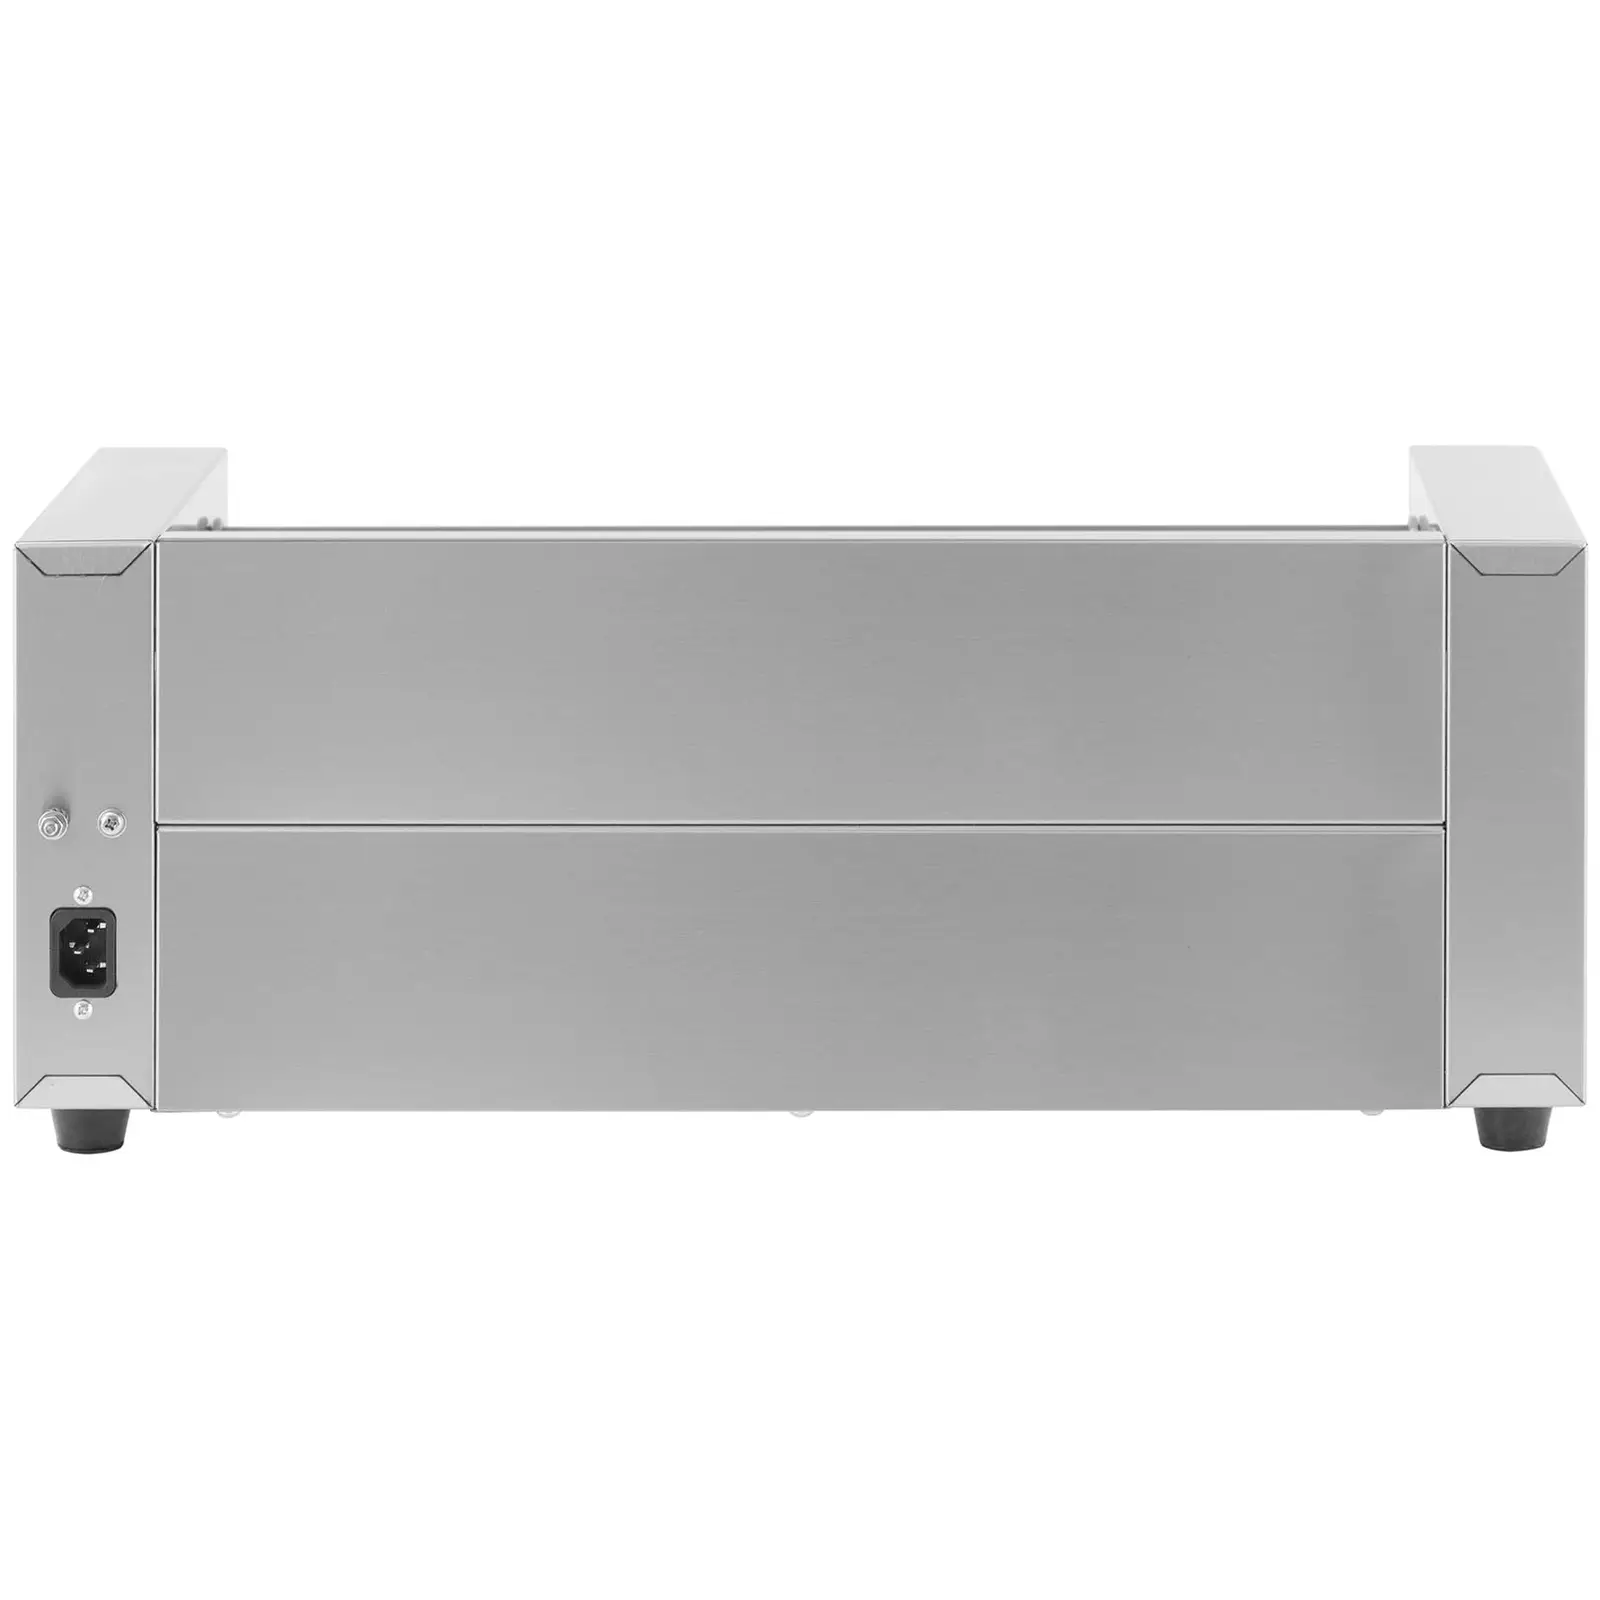 Hot Dog Grill - 5 rollers - Royal Catering - stainless steel